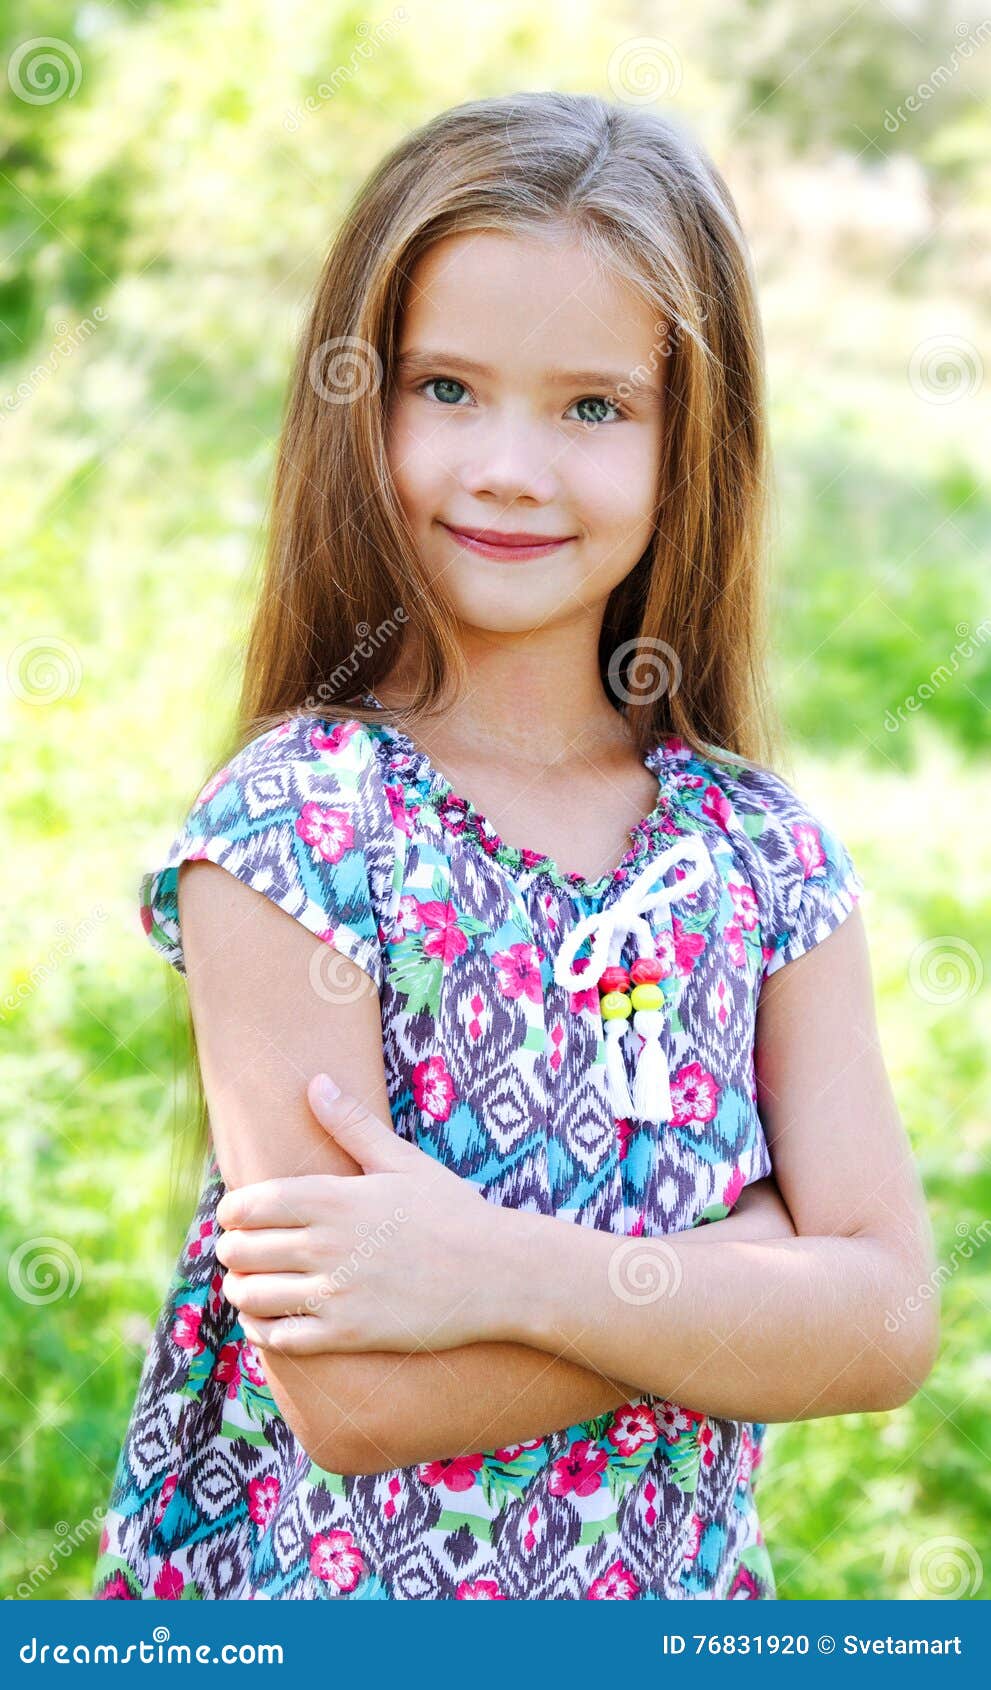 Portrait of Adorable Smiling Little Girl in Summer Day Stock Photo ...